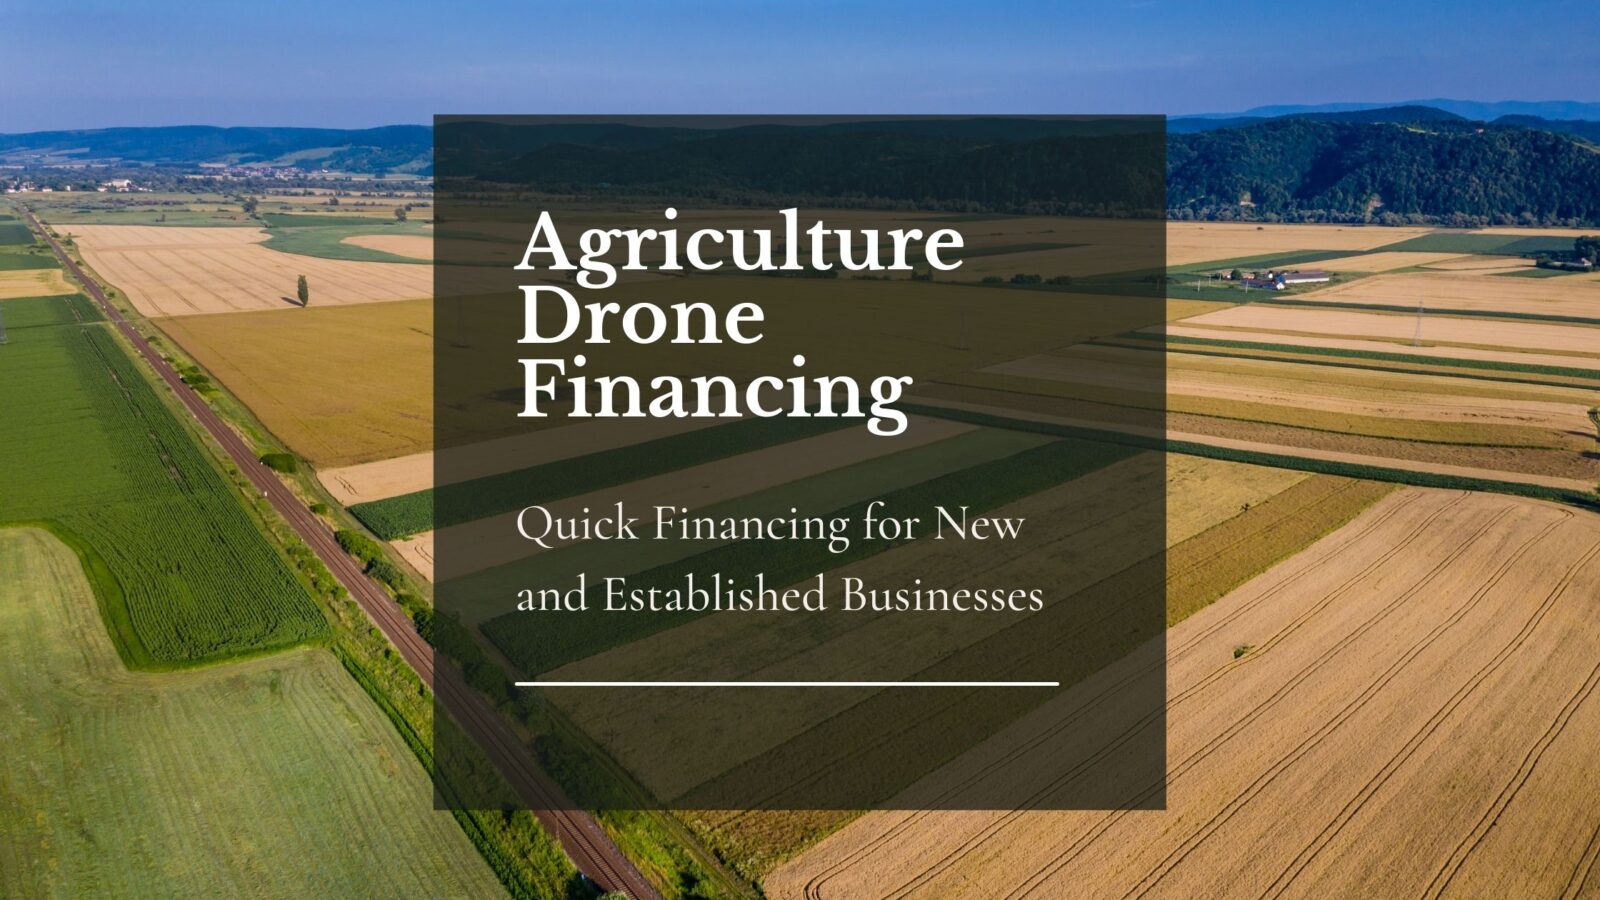 Agriculture Drone Financing